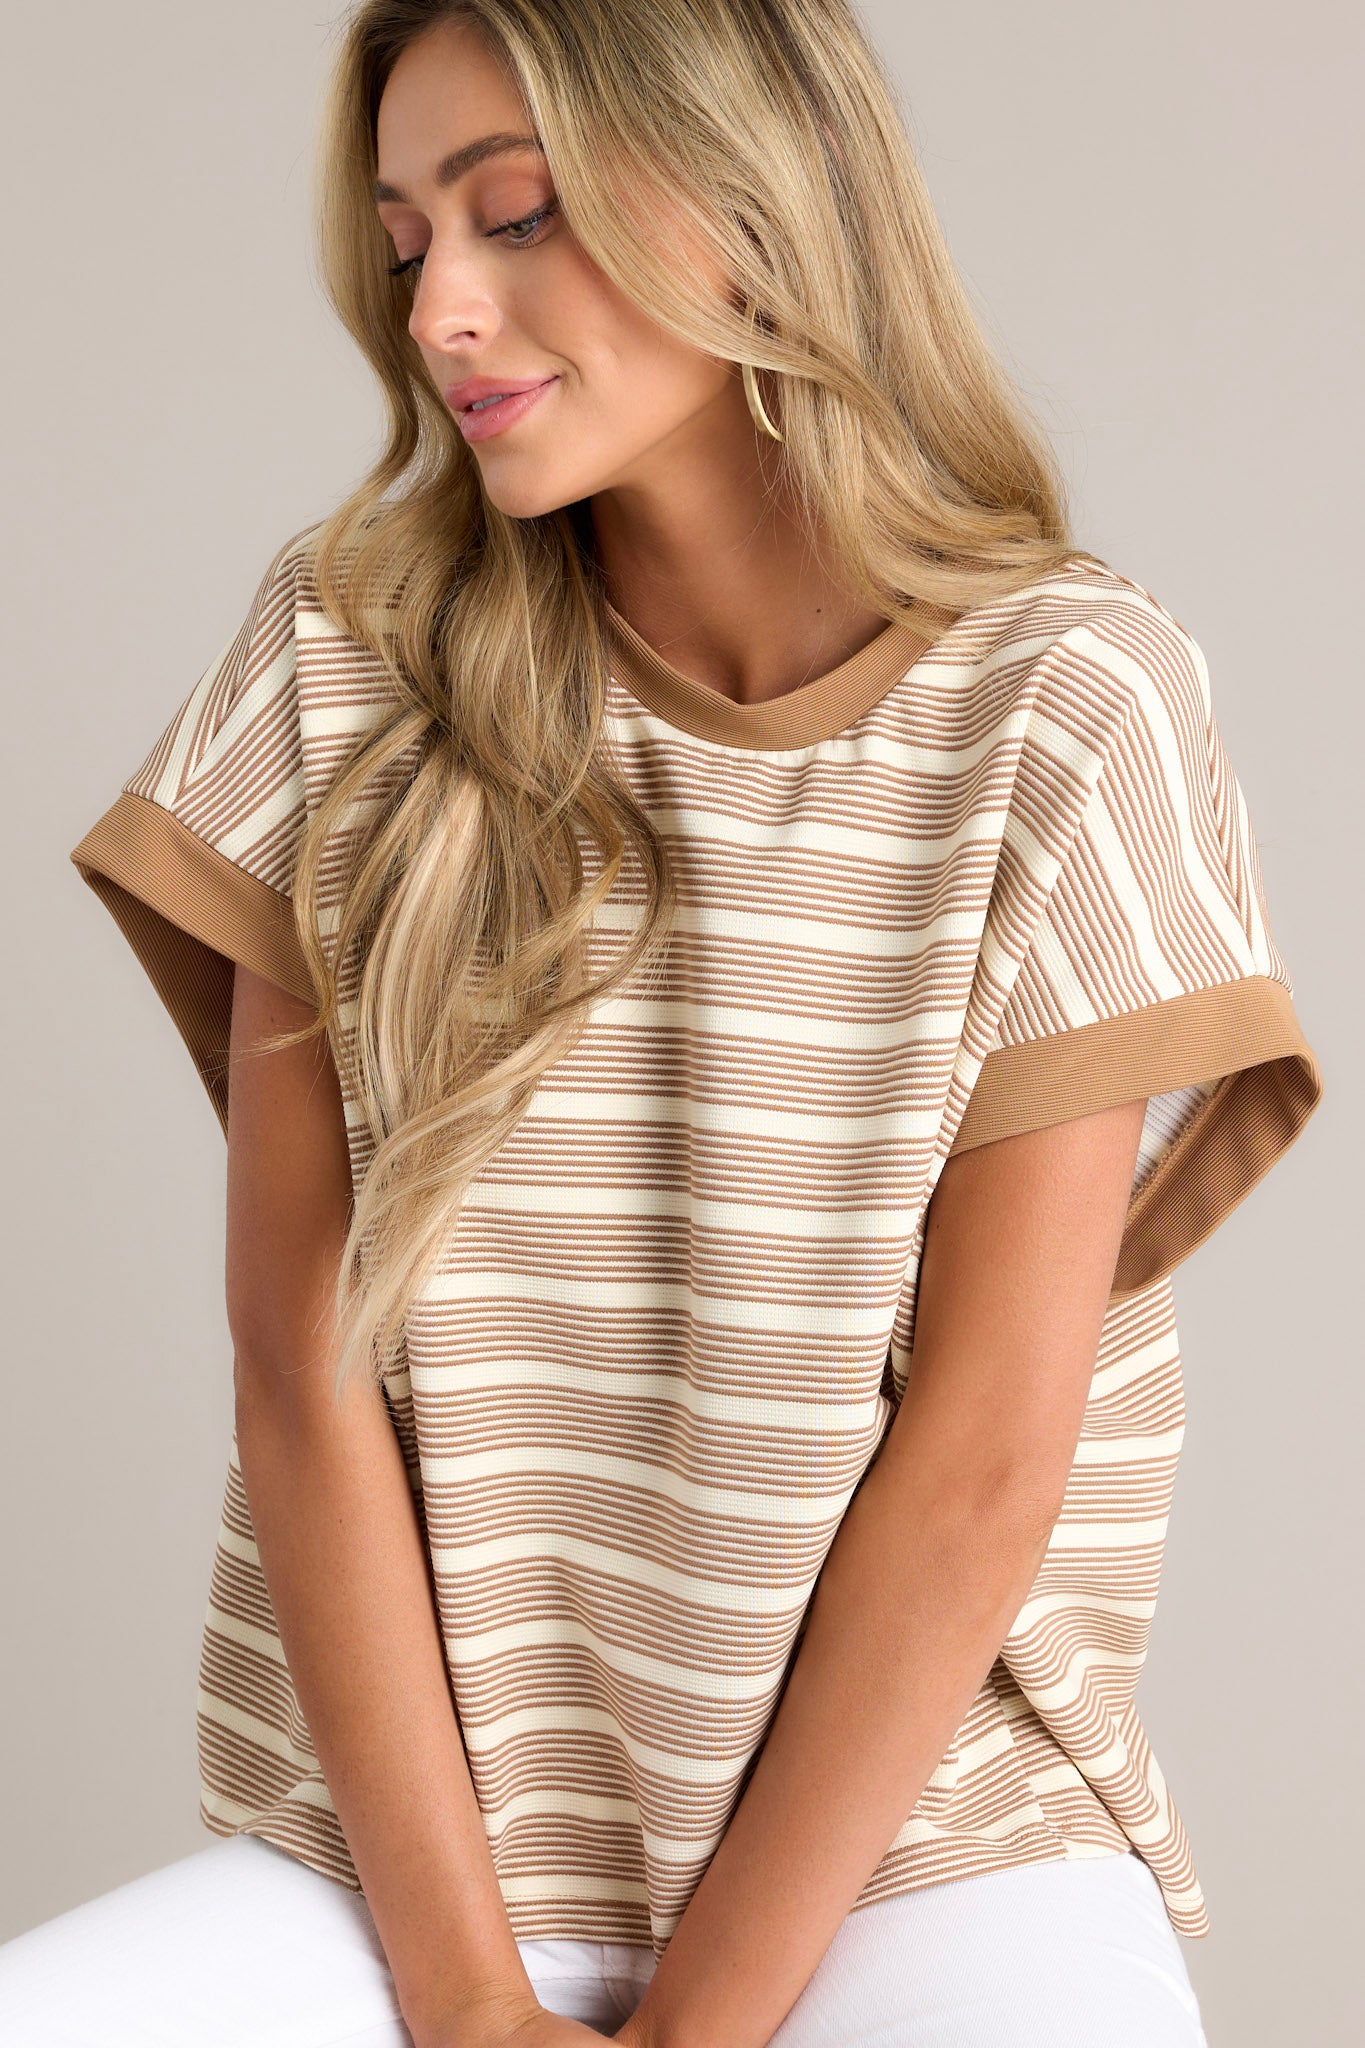 This camel stripe top features a crew neckline, a unique stripe pattern, and thick sleeve hemlines.